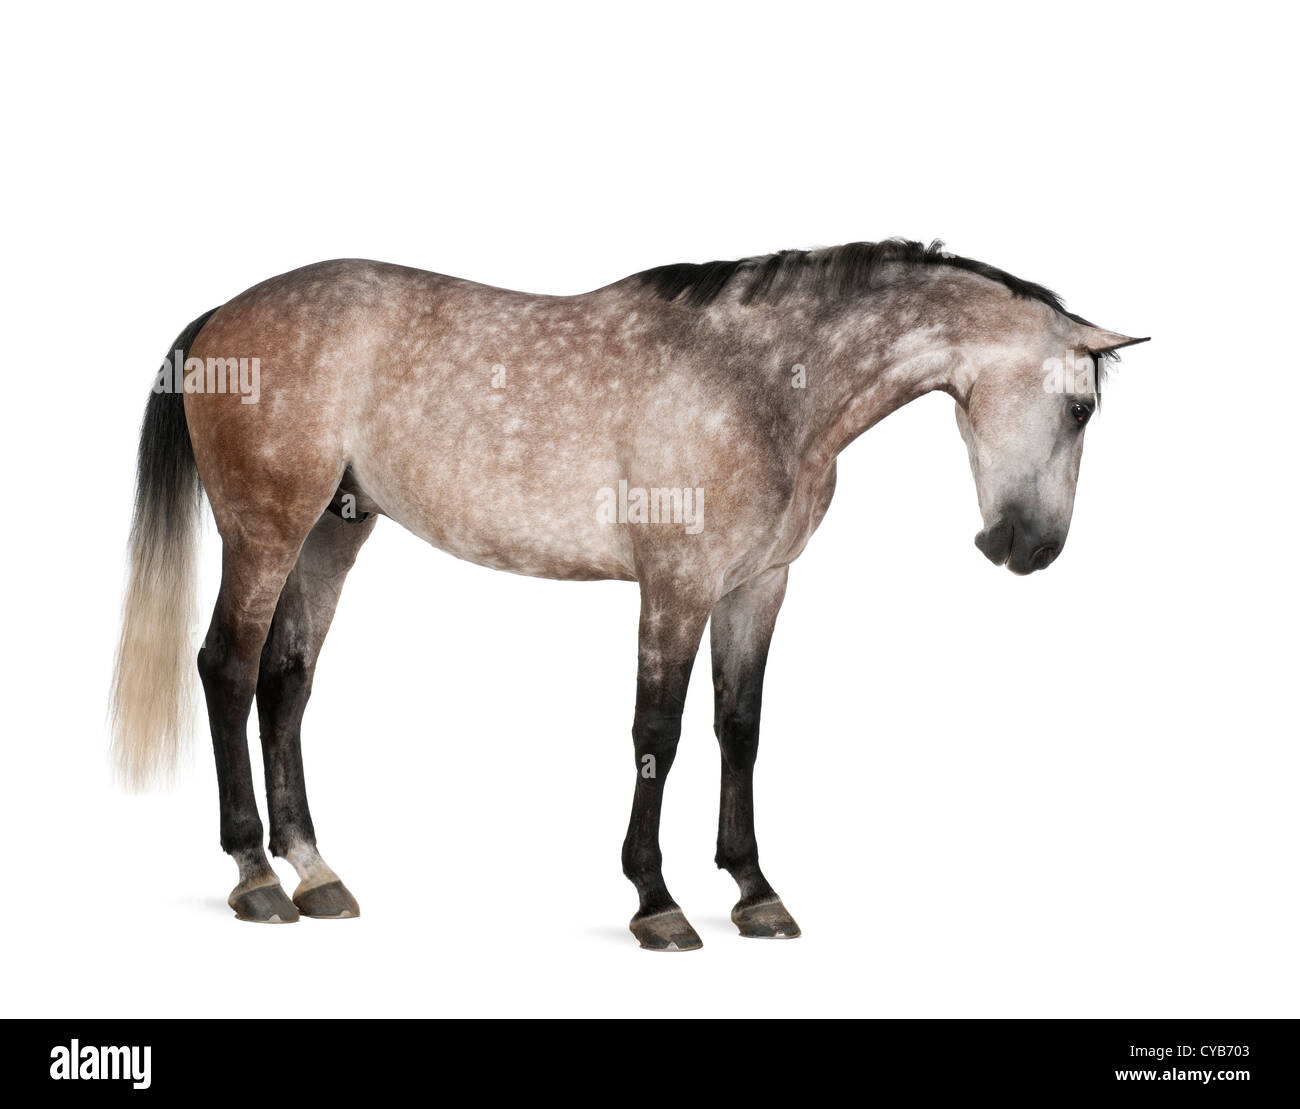 Belgian Warmblood, 6 years old, standing against white background Stock Photo